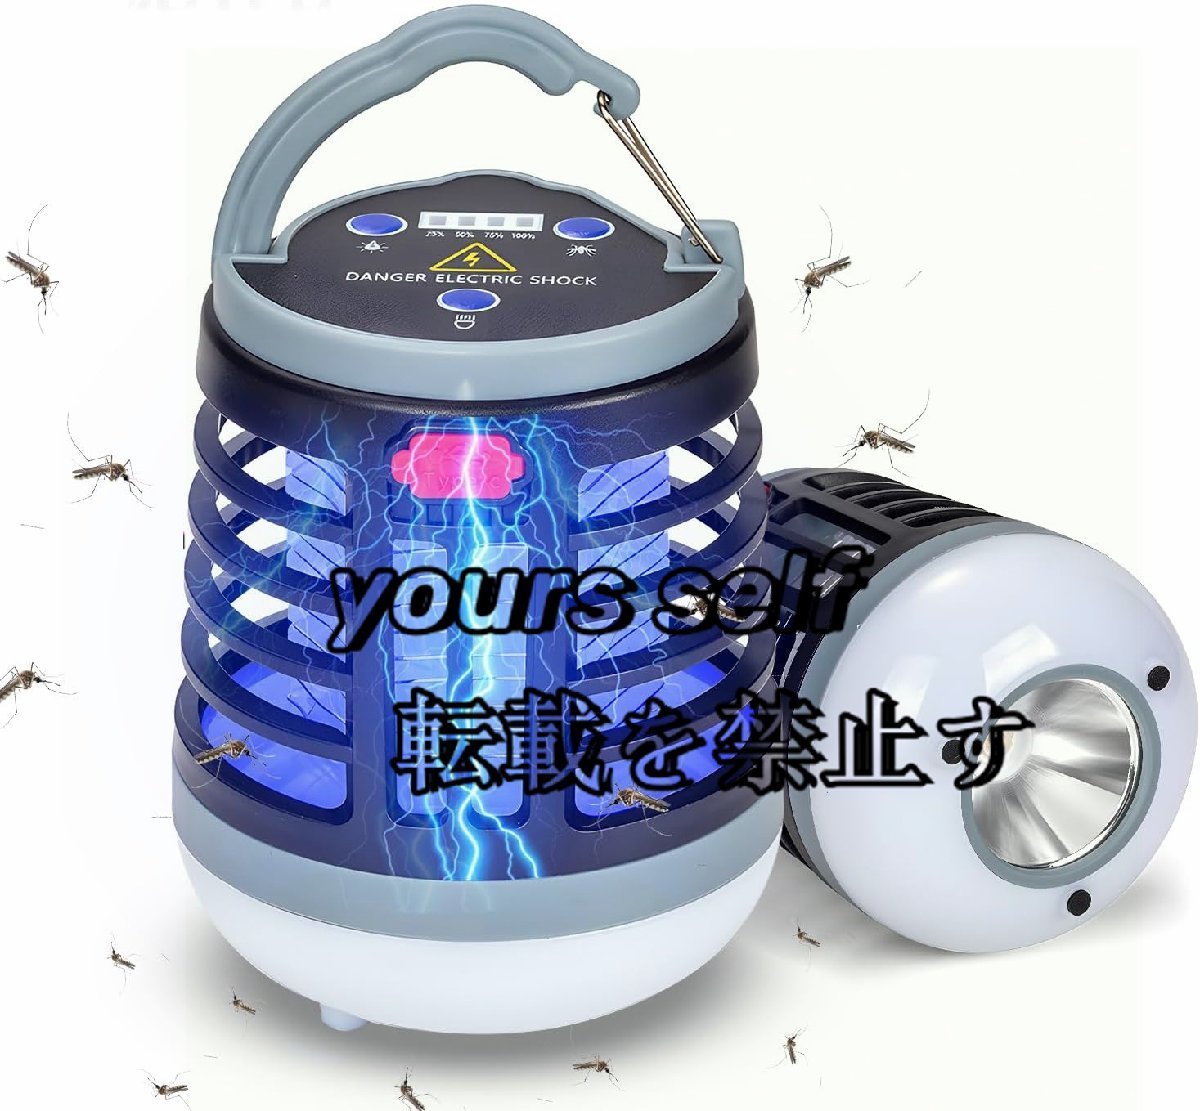  leather new version electric mosquito repellent vessel electric shock insecticide machine LED light source absorption type . insect vessel less . energy conservation 360° quiet sound cable attaching type-c sudden speed charge mosquito insect measures outdoors indoor applying 